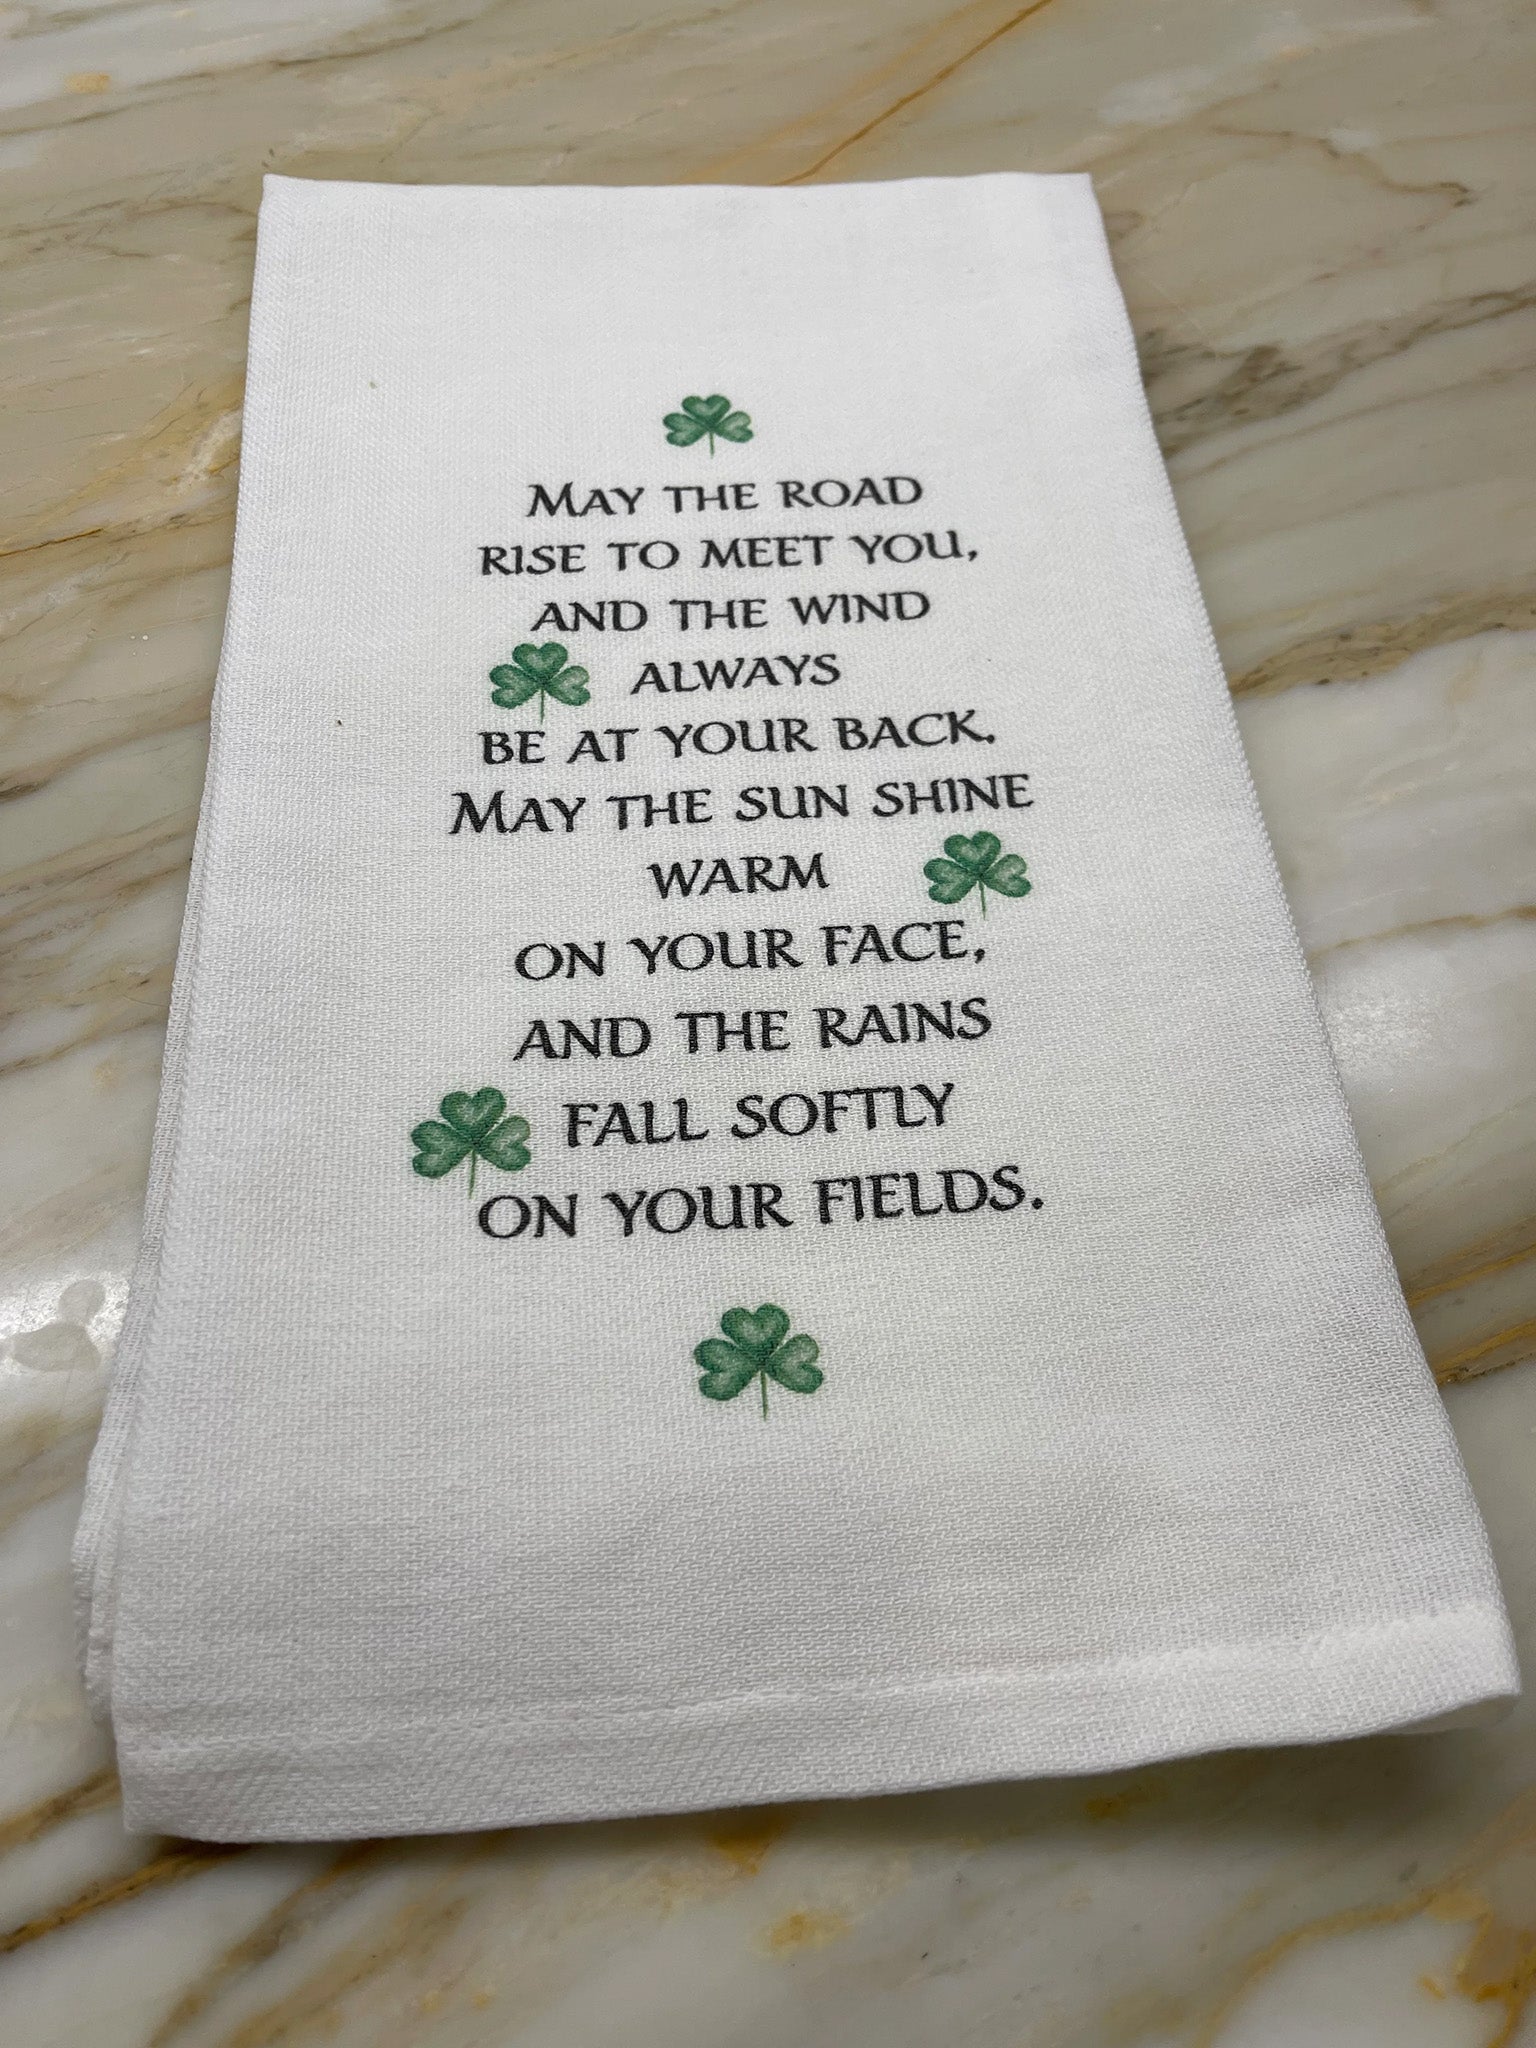 May the Road Rise to Meet You and the Wind Always be at your back - words on a dishtowel with shamrocks.